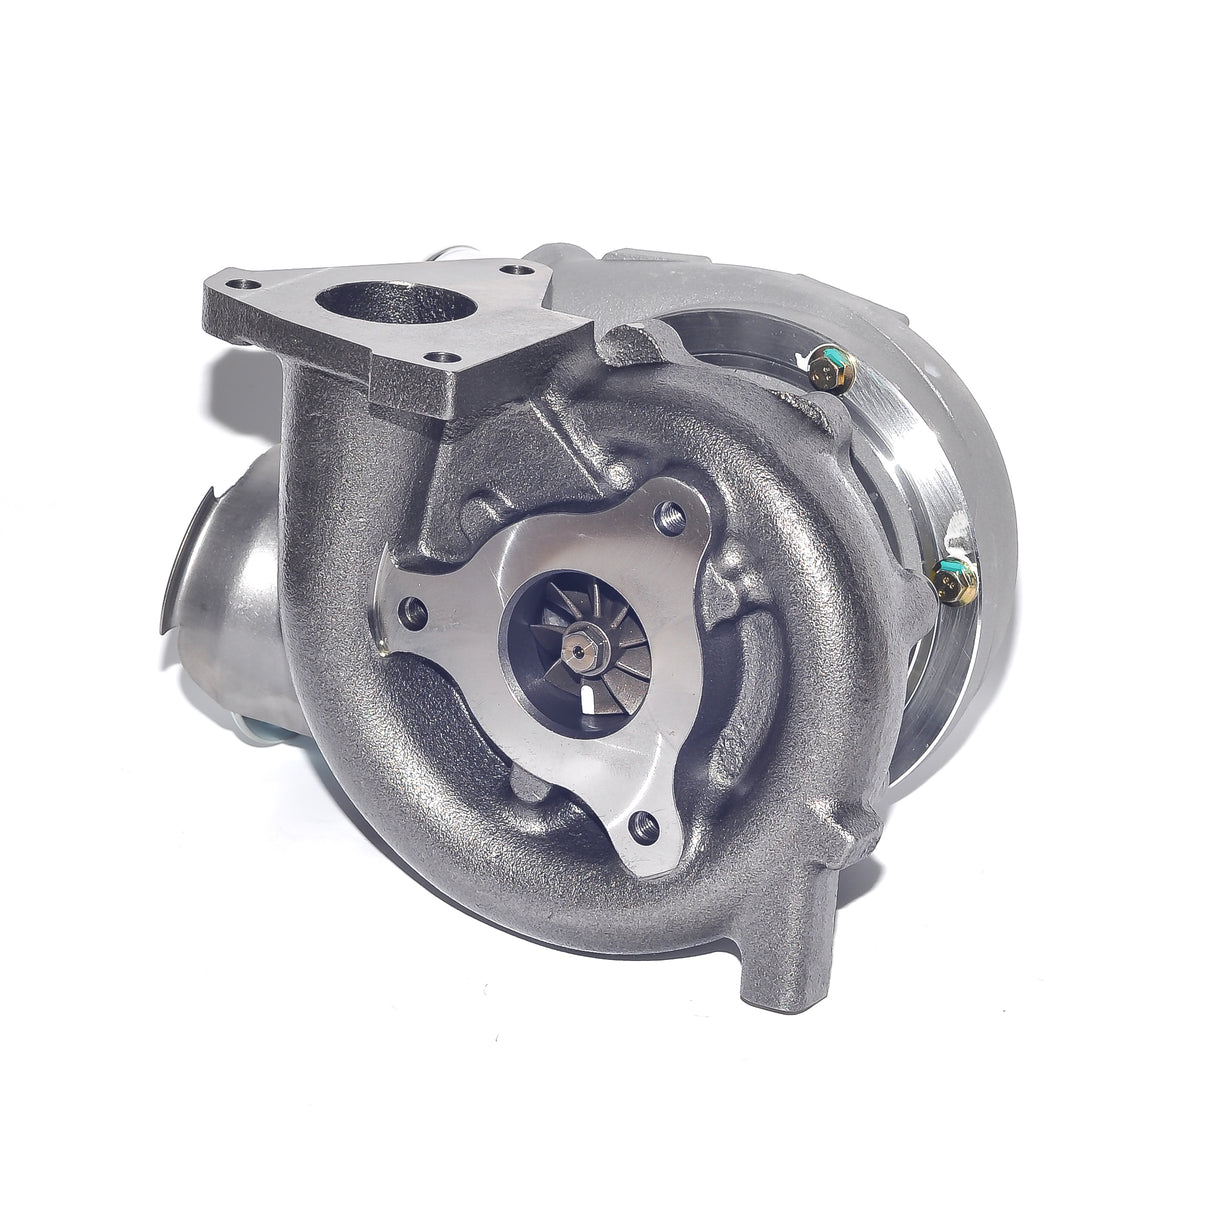 CCT Turbocharger To Suit Nissan Patrol ZD30 724639 / VS40A Oil Cooled Only